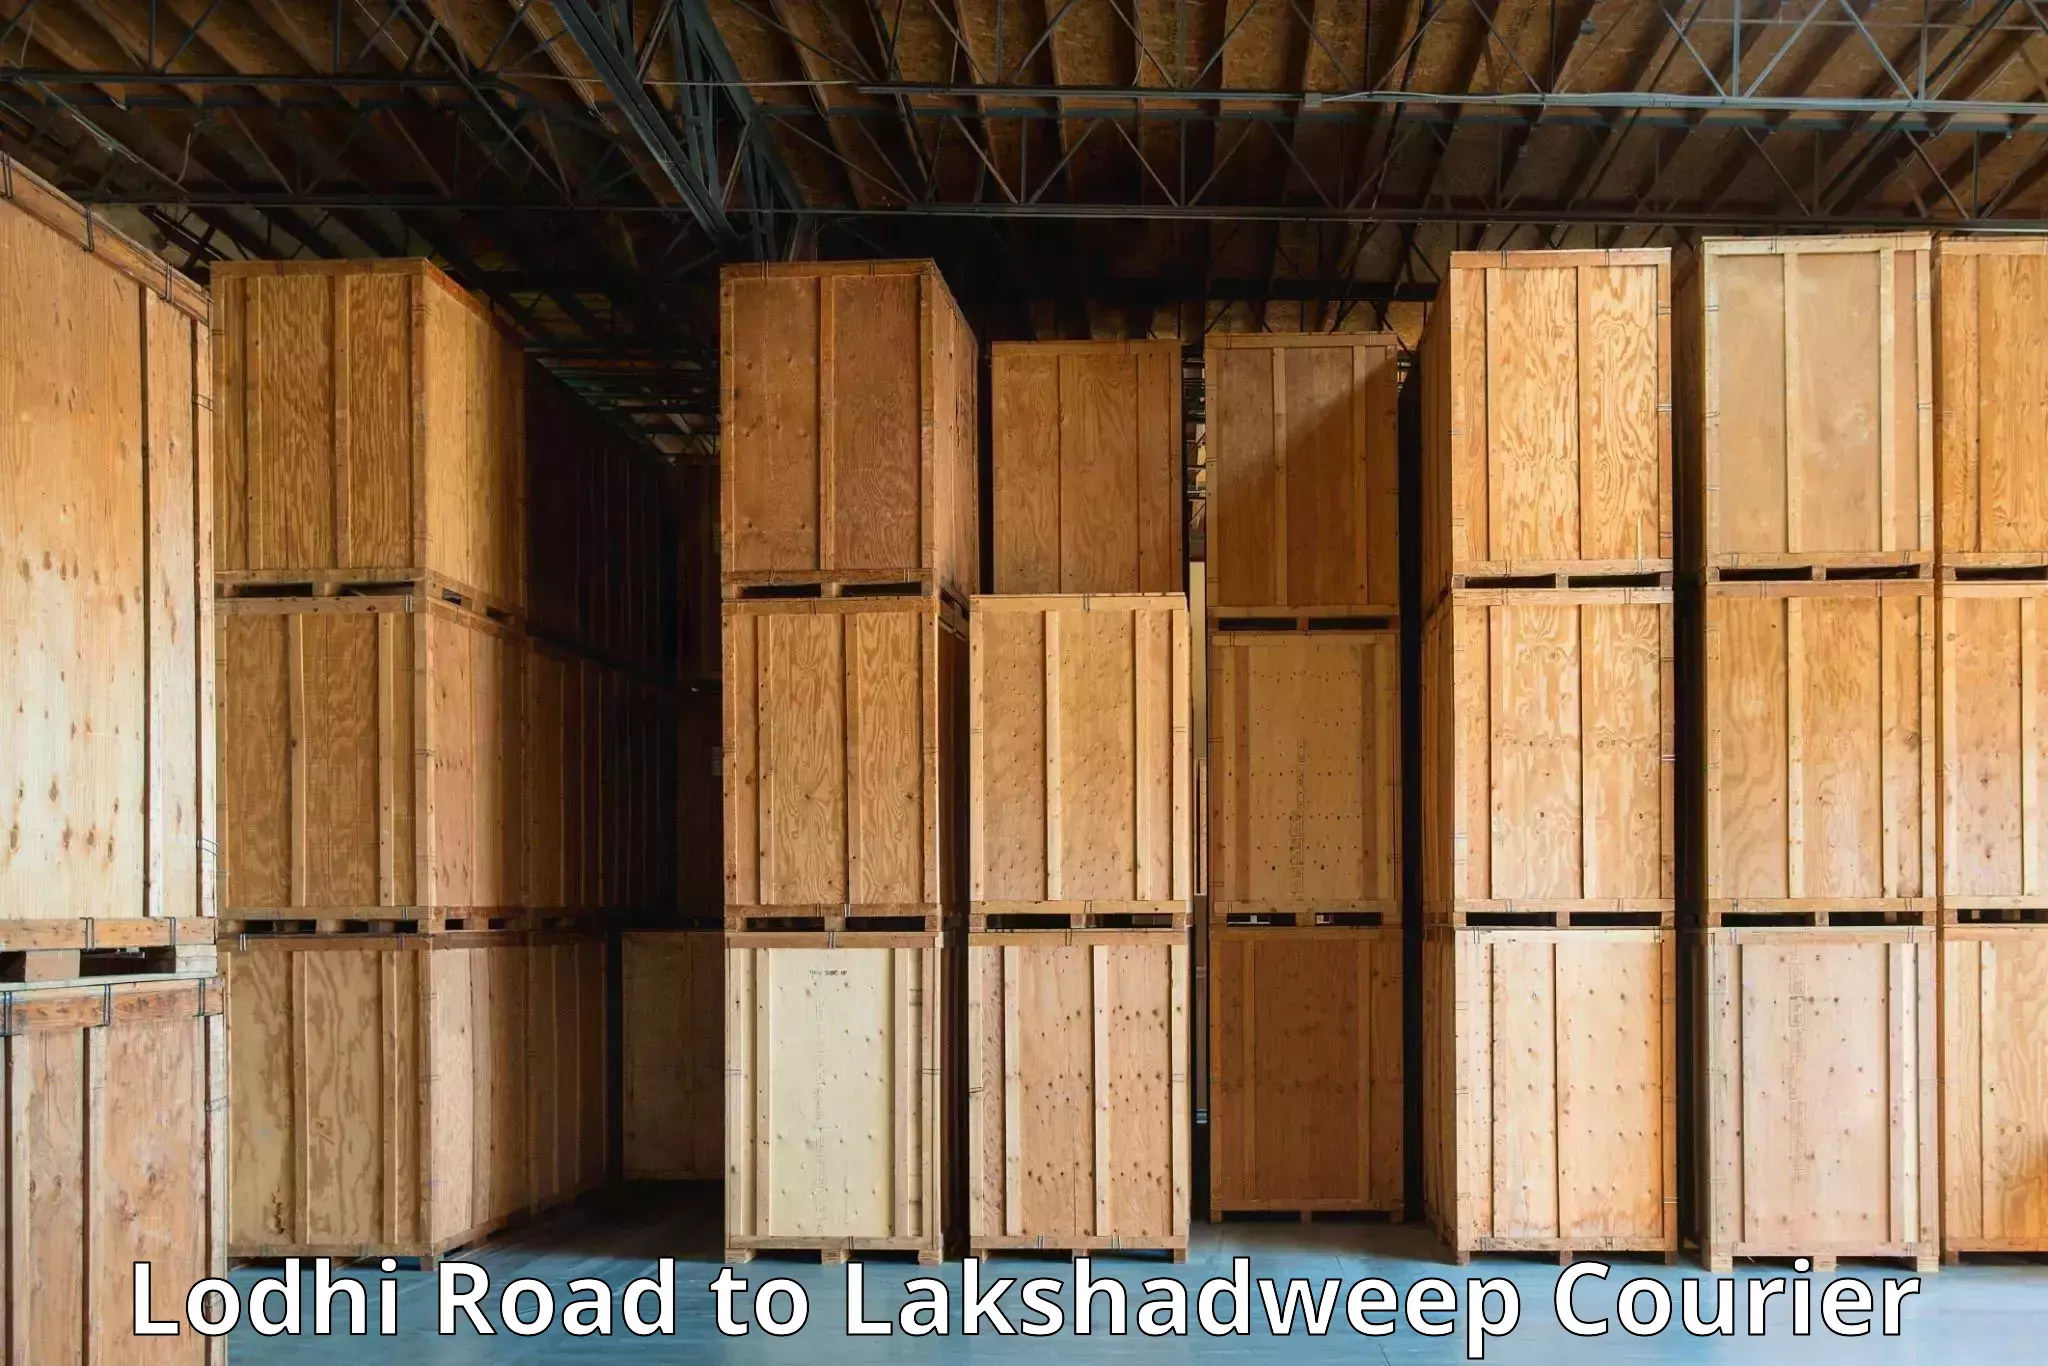 Efficient freight service Lodhi Road to Lakshadweep